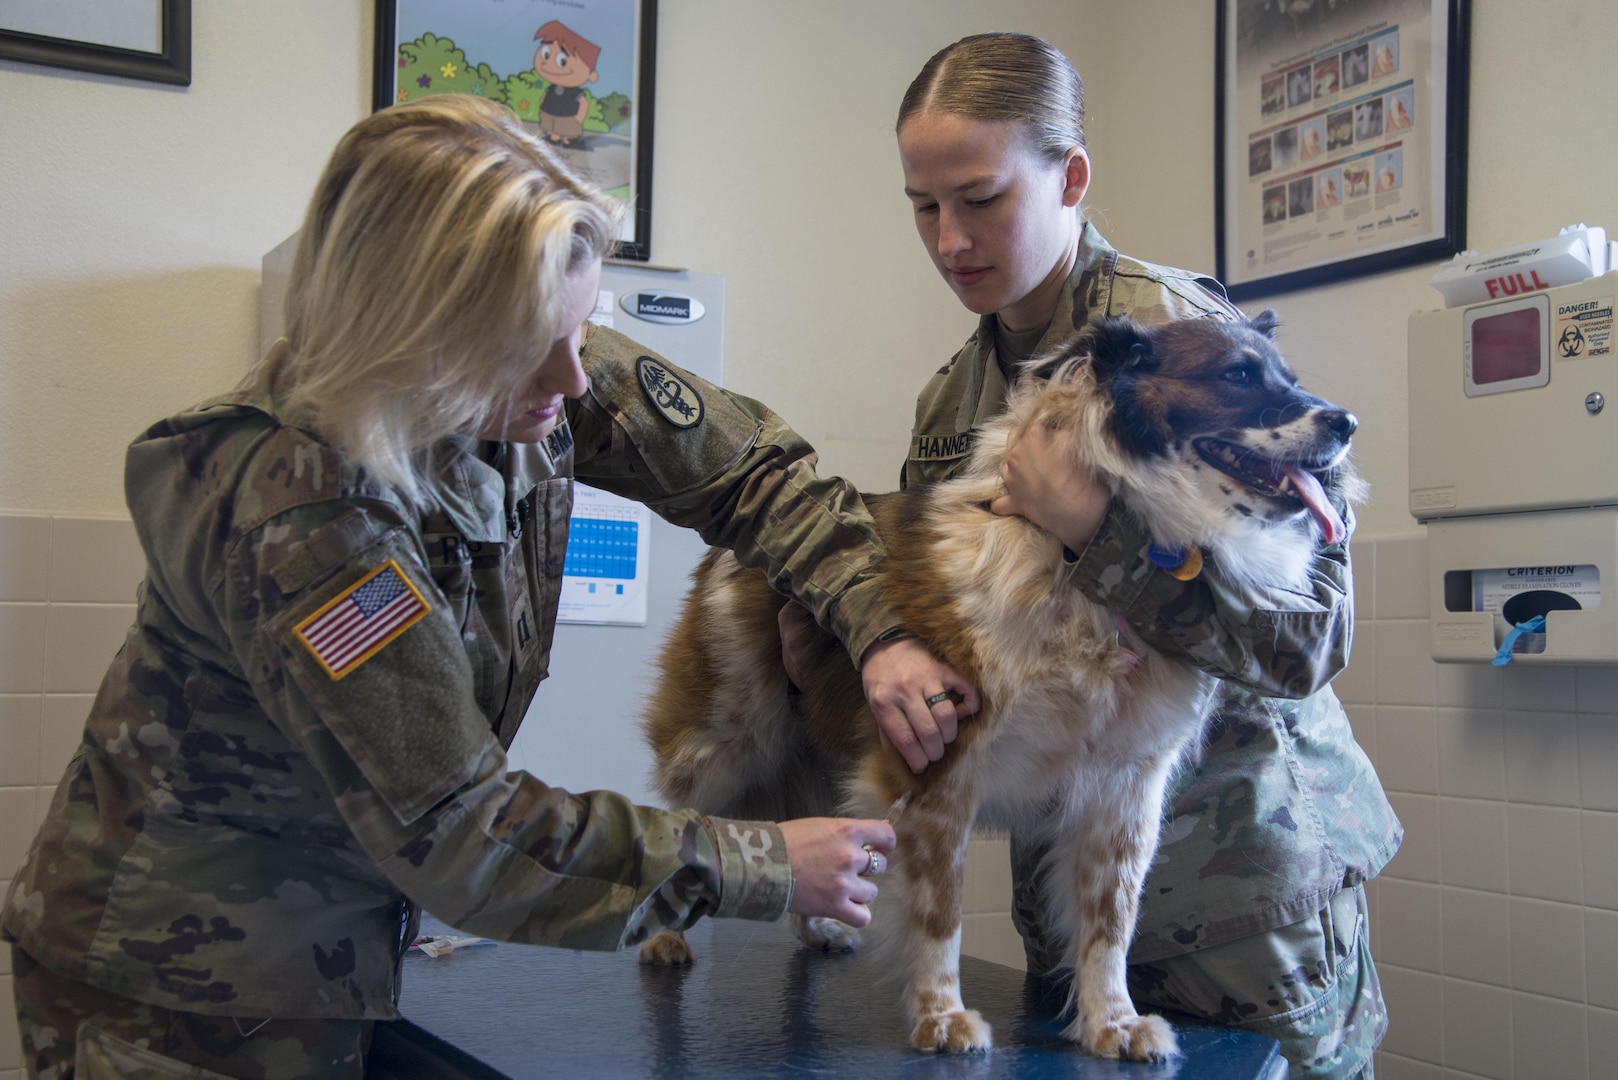 U.S. Army Captain Daniela Roberts, South Texas Branch Veterinarian Services veterinarian, administers a shot to a dog as Sgt. Chelsea Hanneman, South Texas Branch Veterinarian Services veterinarian technician, holds it during its annual checkup June 19, 2017, at Joint Base San Antonio-Randolph Veterinarian Clinic.  Military veterinarians ensure the strength of veterinary public health capabilities through veterinary medical and surgical care, food safety and defense, biomedical research and development.